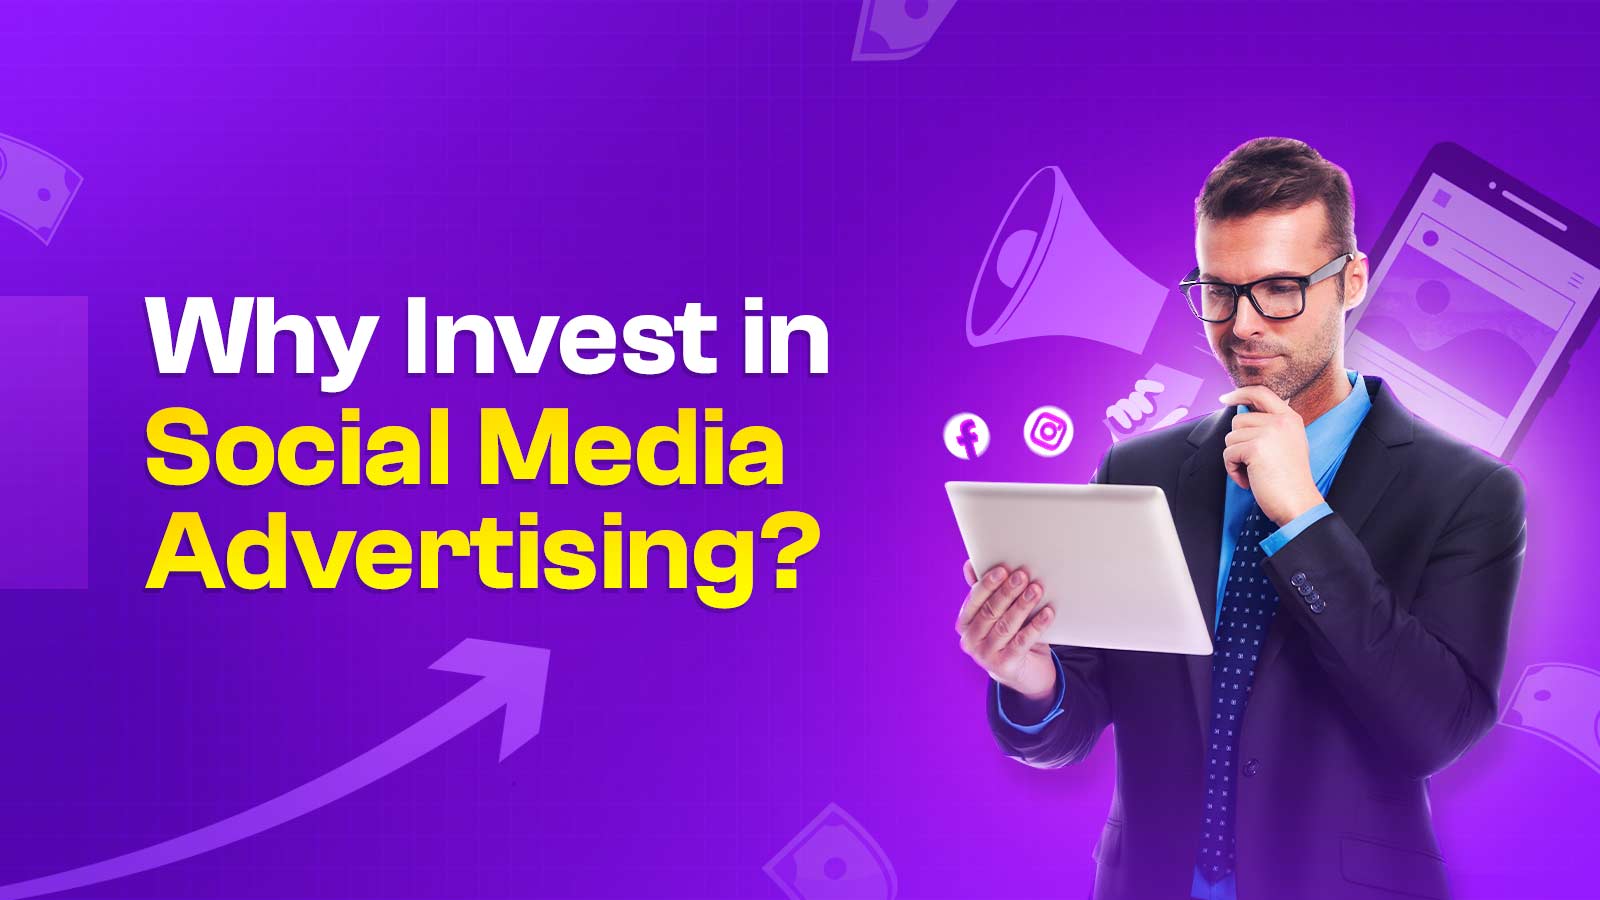 8 Common Reasons Why Invest In Social Media Advertising